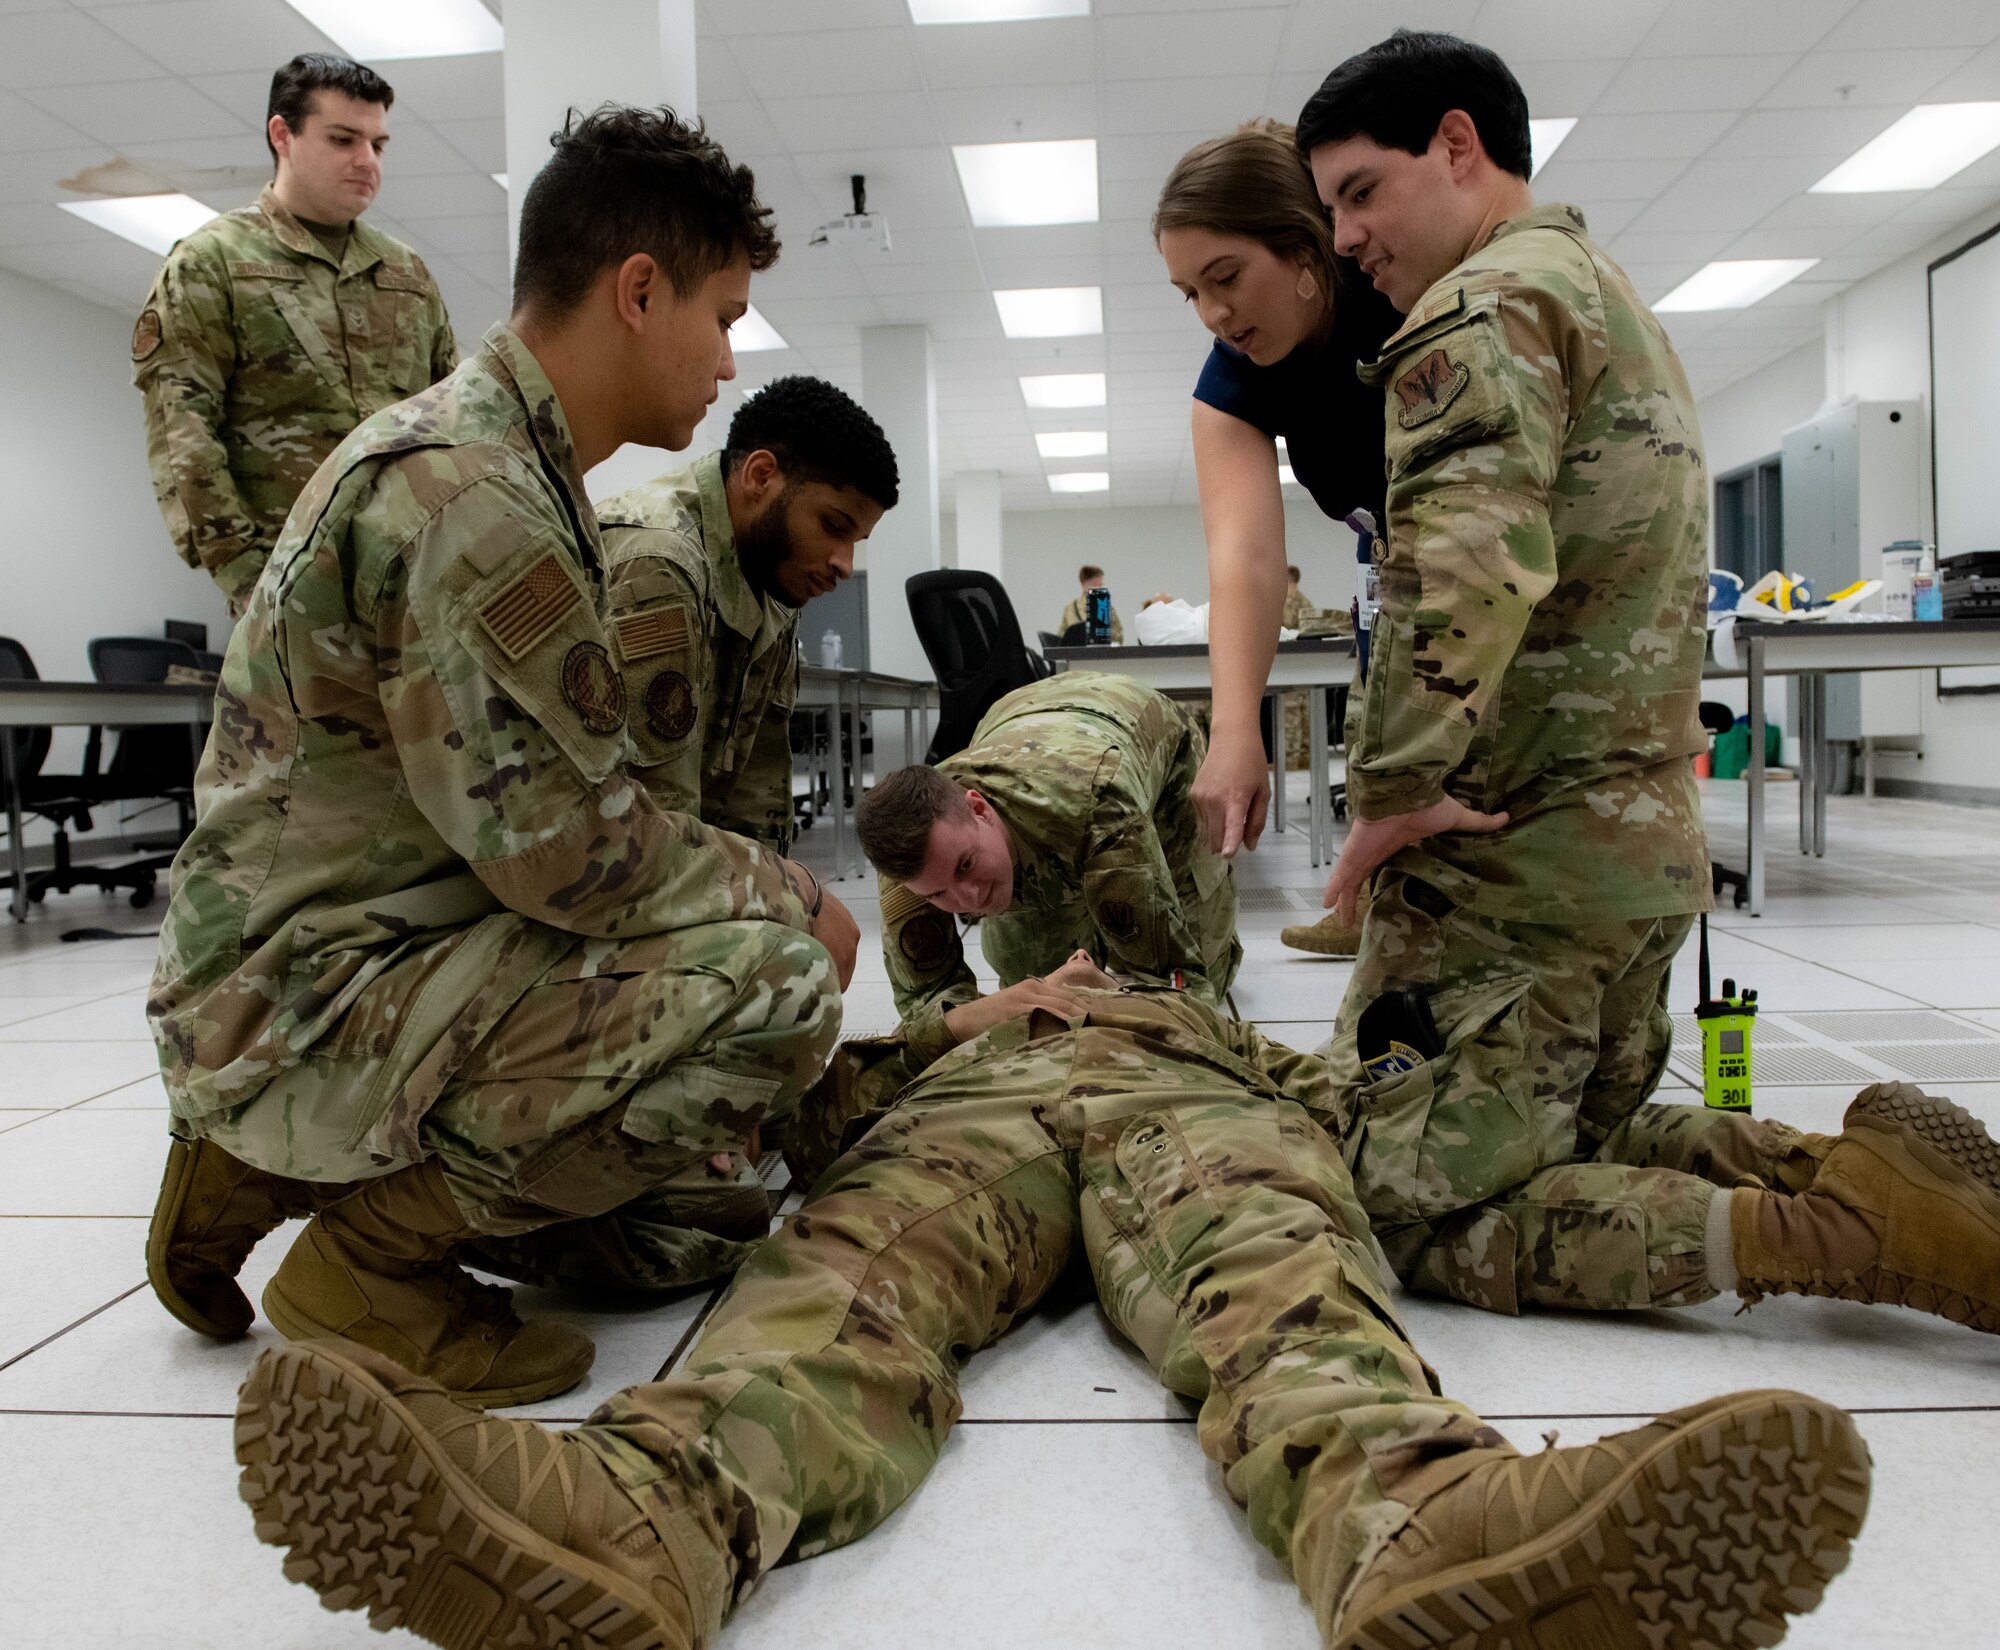 U.S. Air Force Airmen assigned to the 319th Reconnaissance Wing along with a medical professional from the University of North Dakota School of Medicine and Health Sciences Simulation Center practice stabilization techniques during a medical training exercise Aug. 26, 2022, at Grand Forks Air Force Base, North Dakota. During this training event airmen rotated through three training stations with simulated medical emergency scenarios. (U.S. Air Force photo by Senior Airman Phyllis Jimenez)